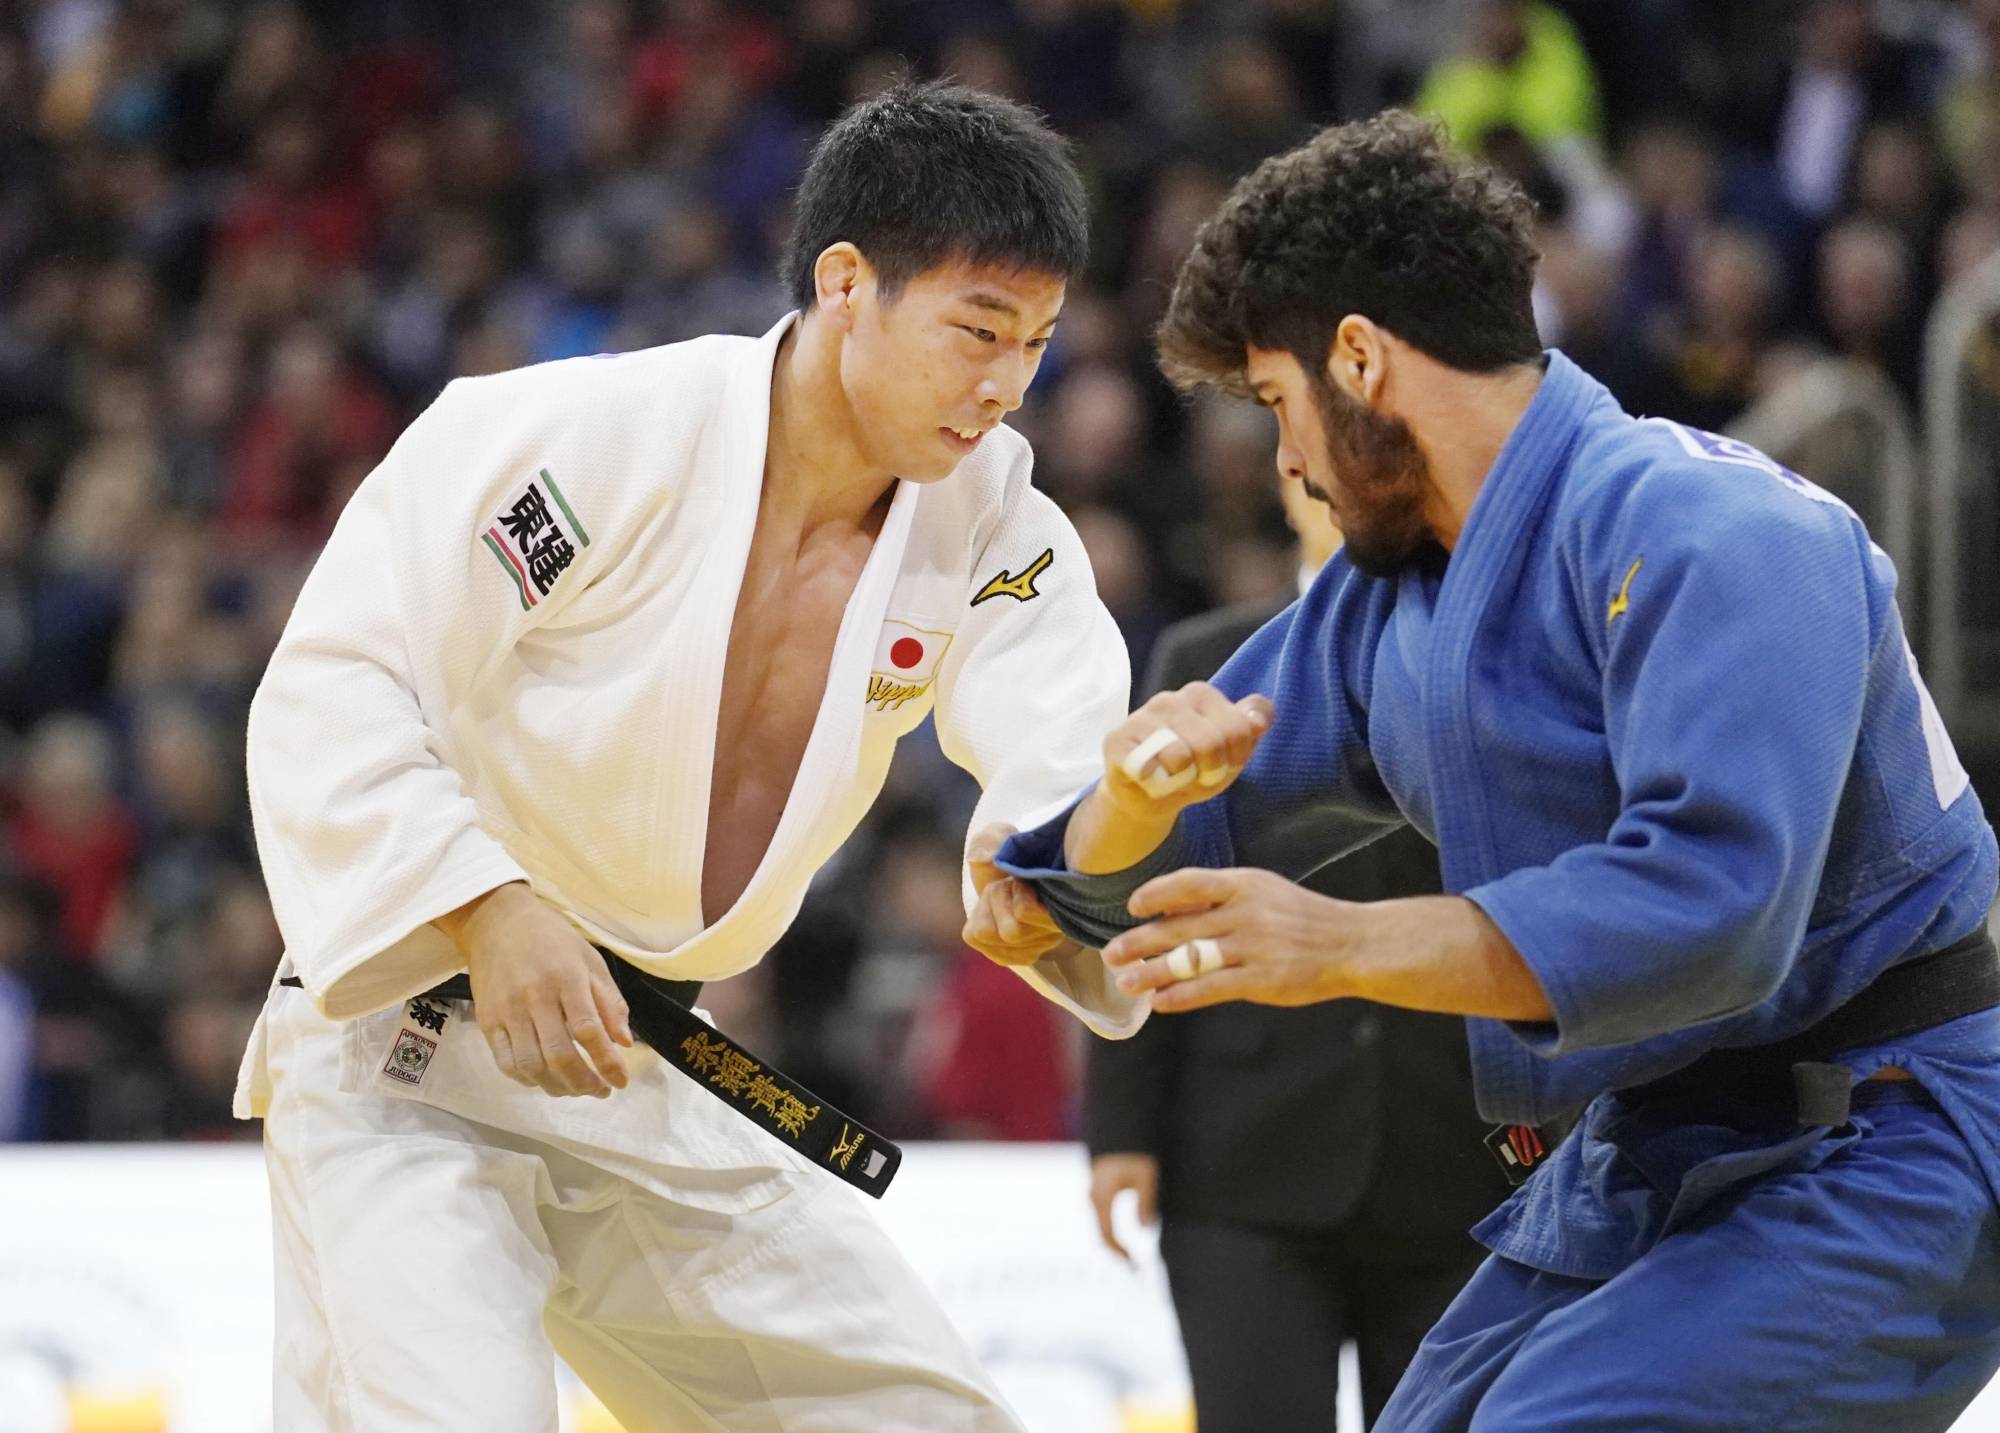 International Judo Federation to pass on holding Tokyo Grand Slam in December